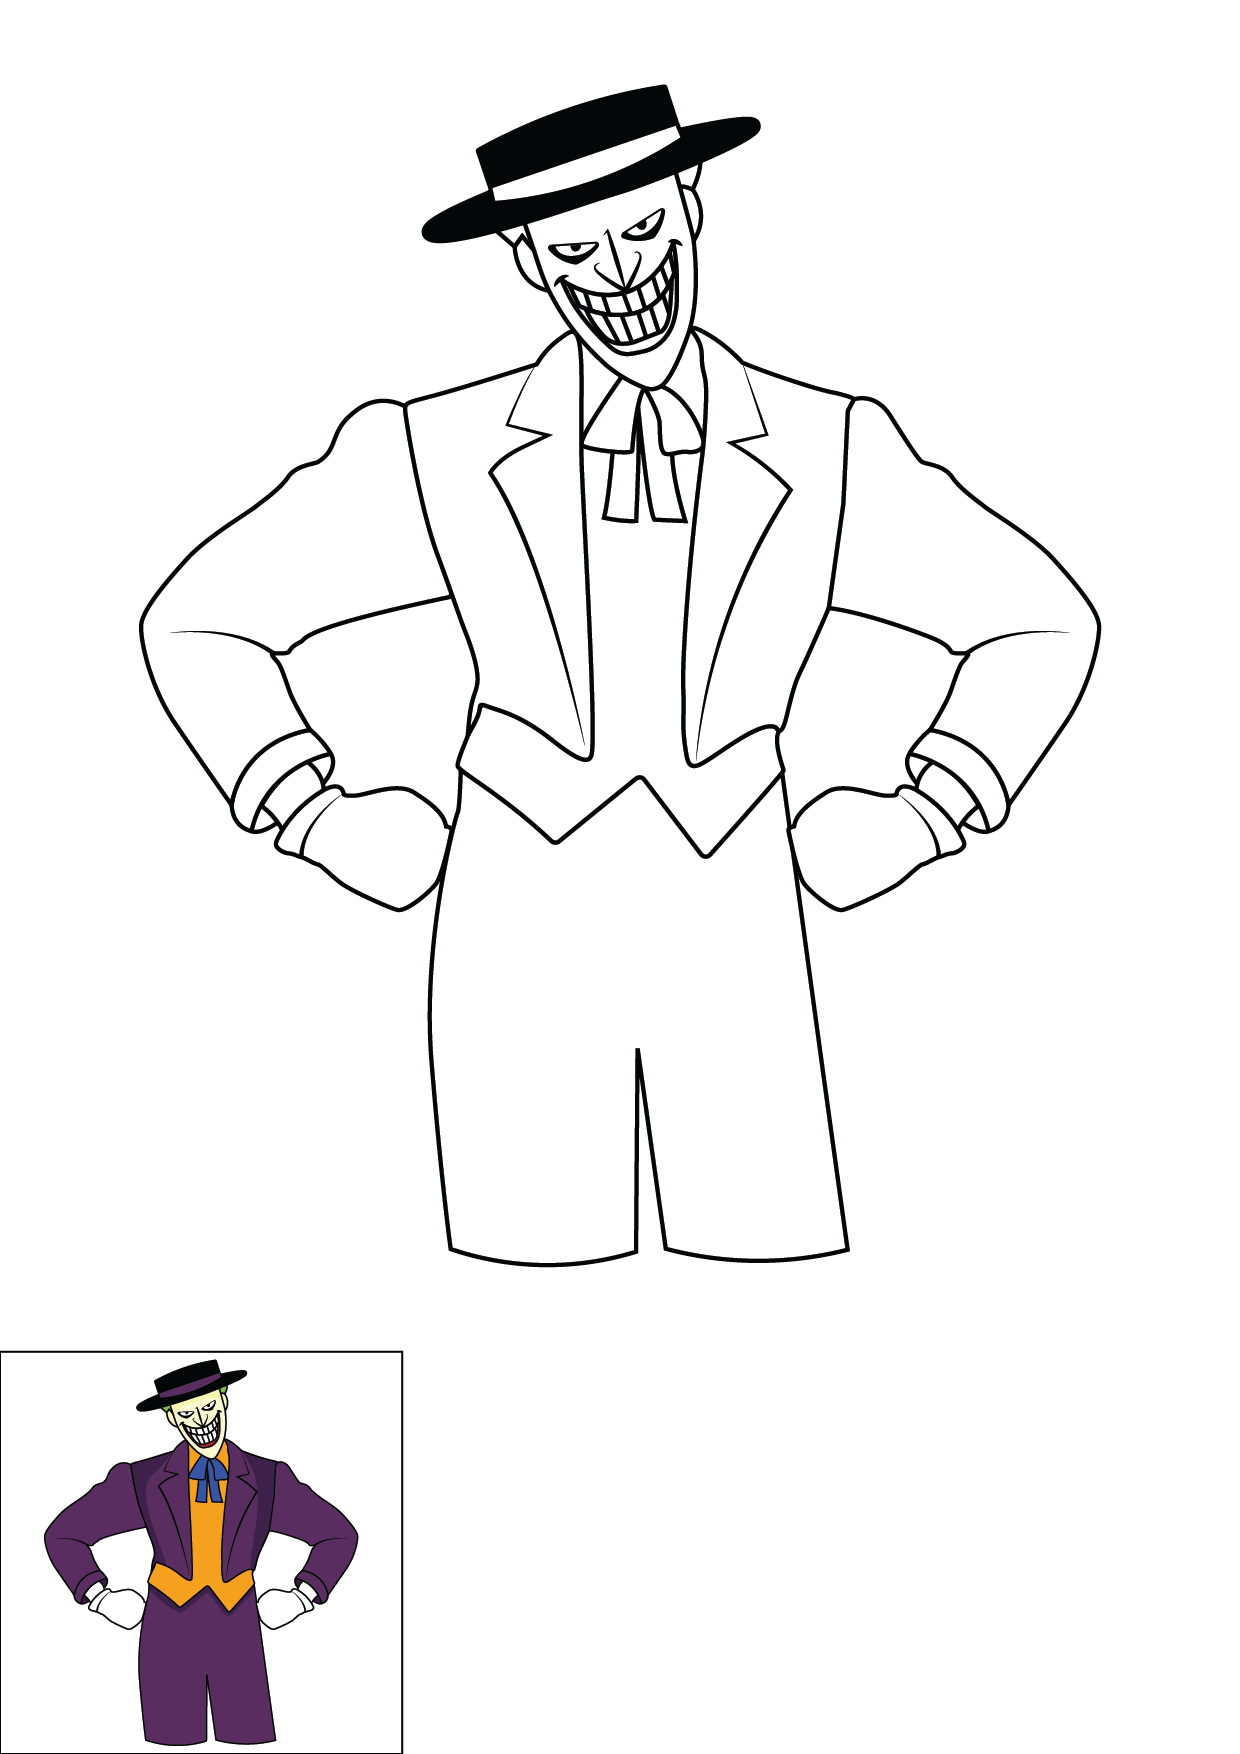 How to Draw The Joker Cartoon Step by Step Printable Color